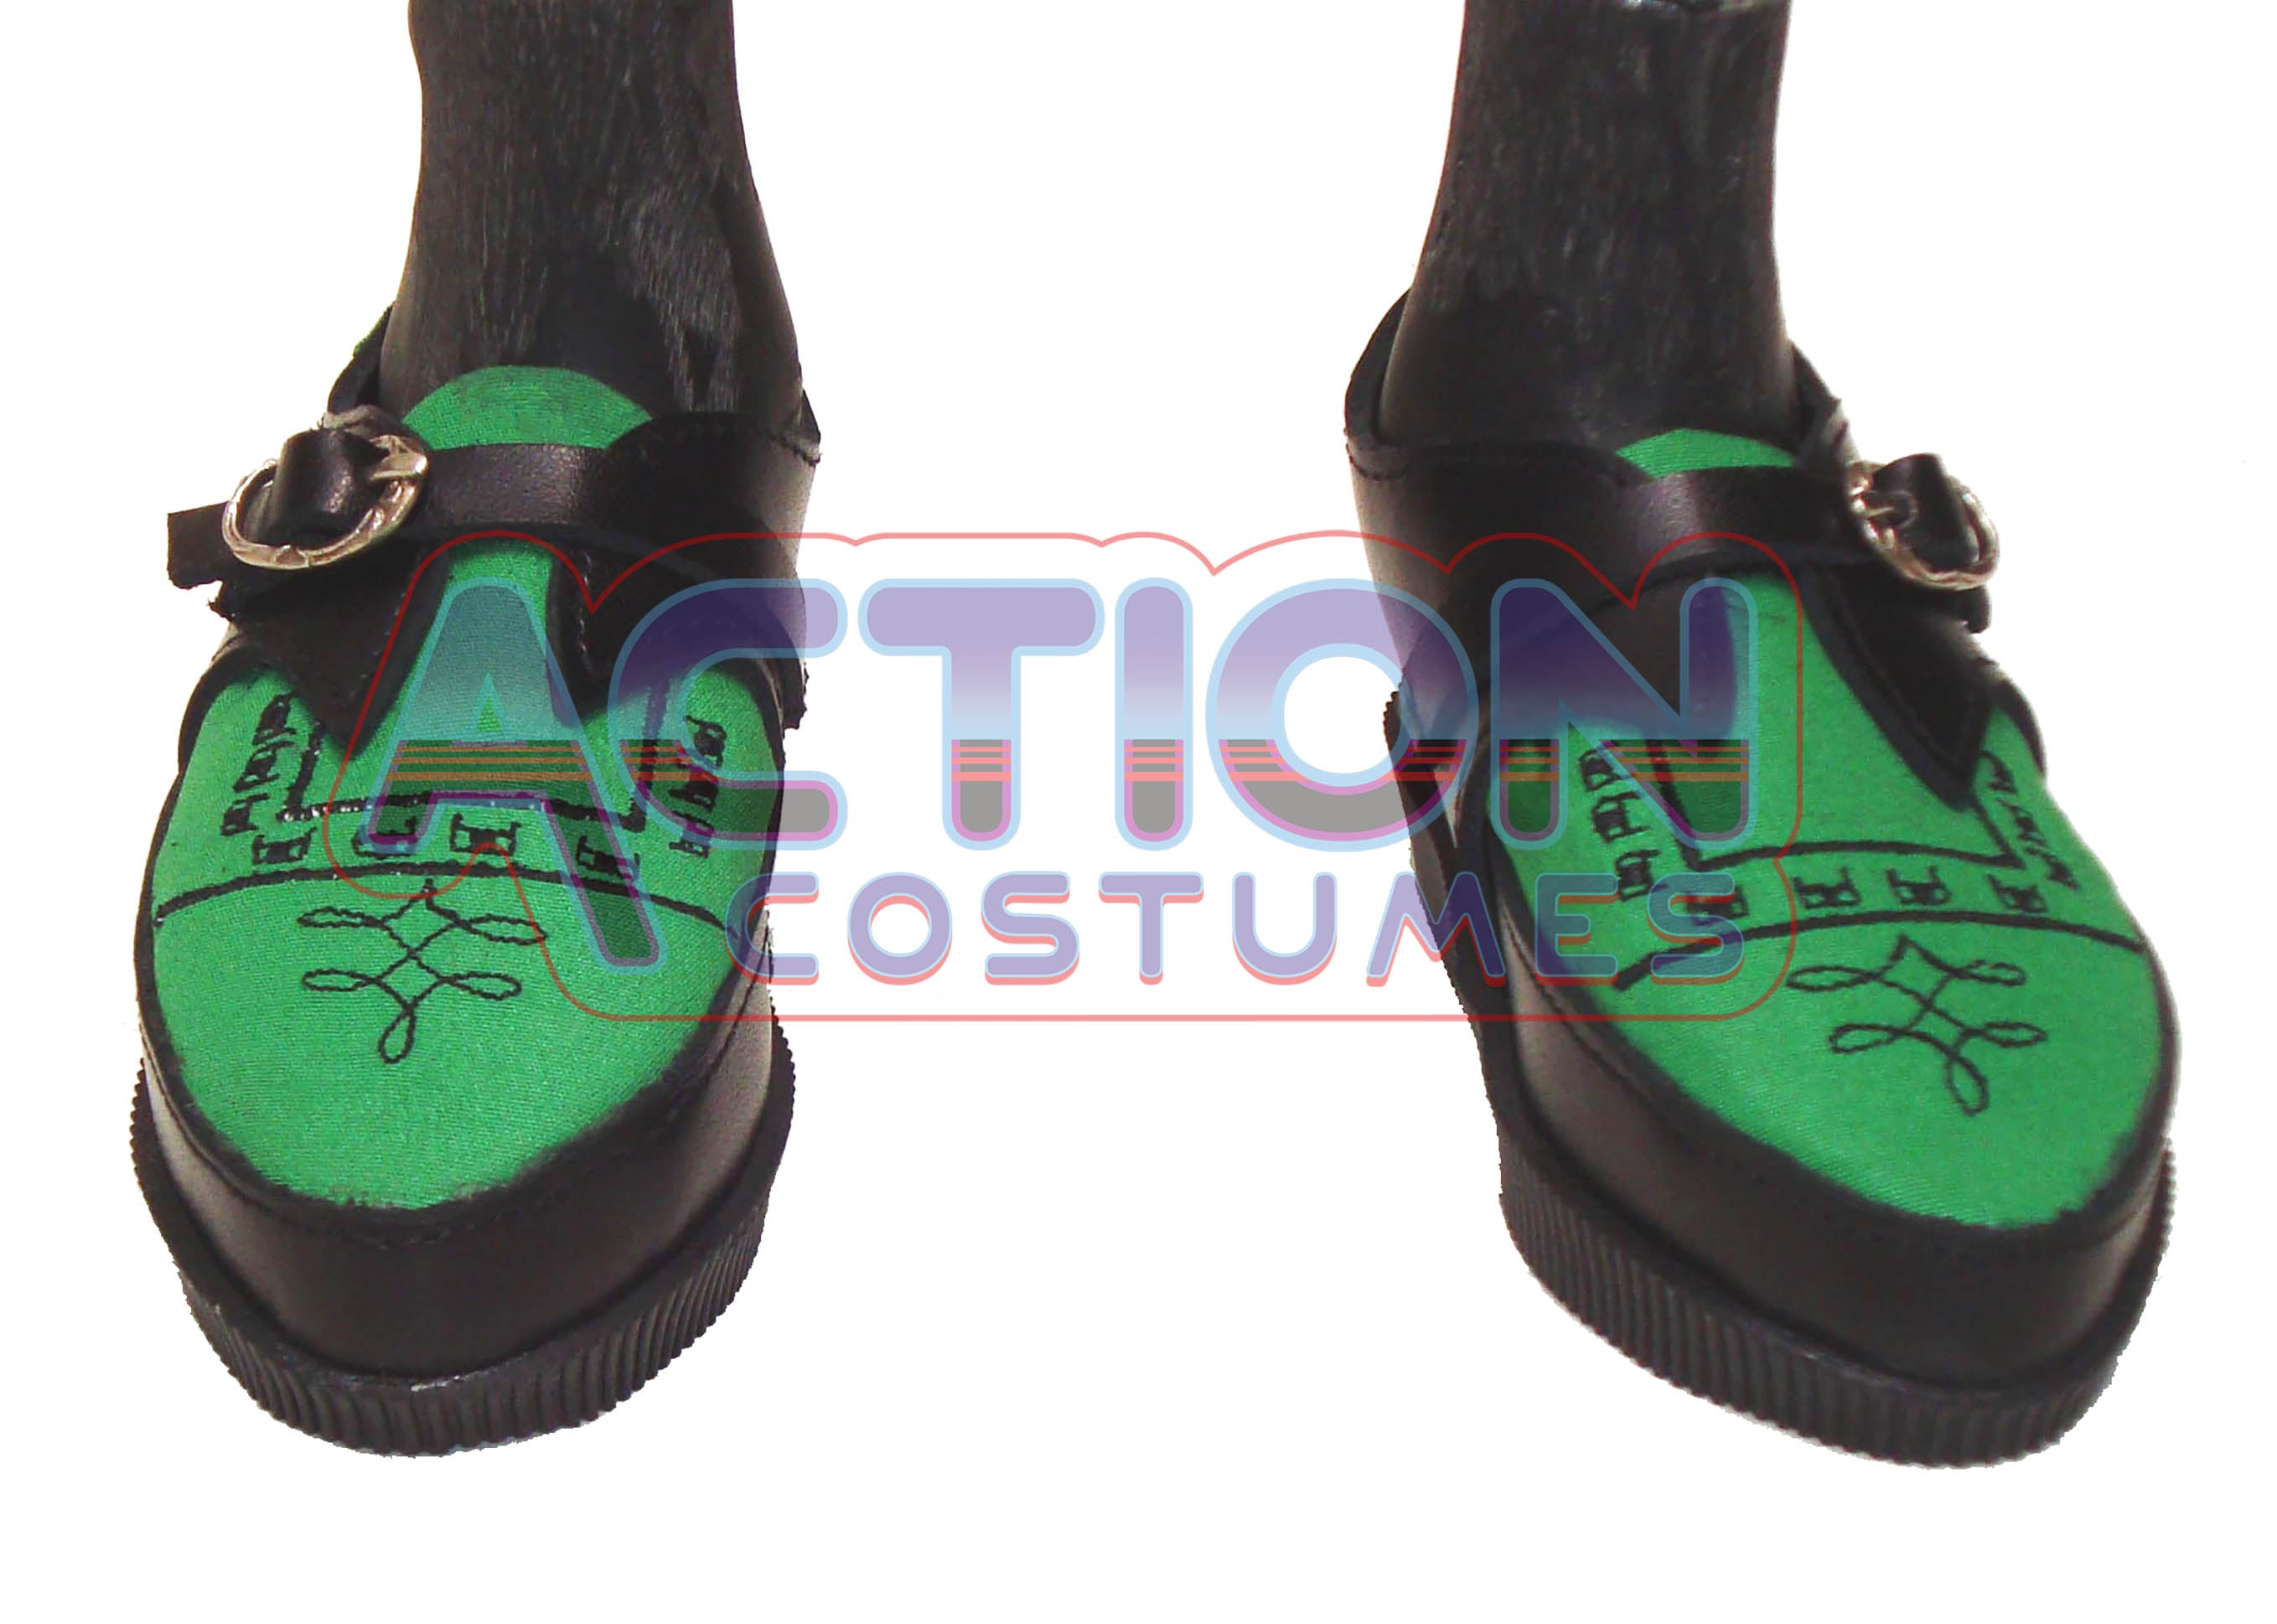 mini-riddler-shoes-for-1-3-scale-display-90s-style